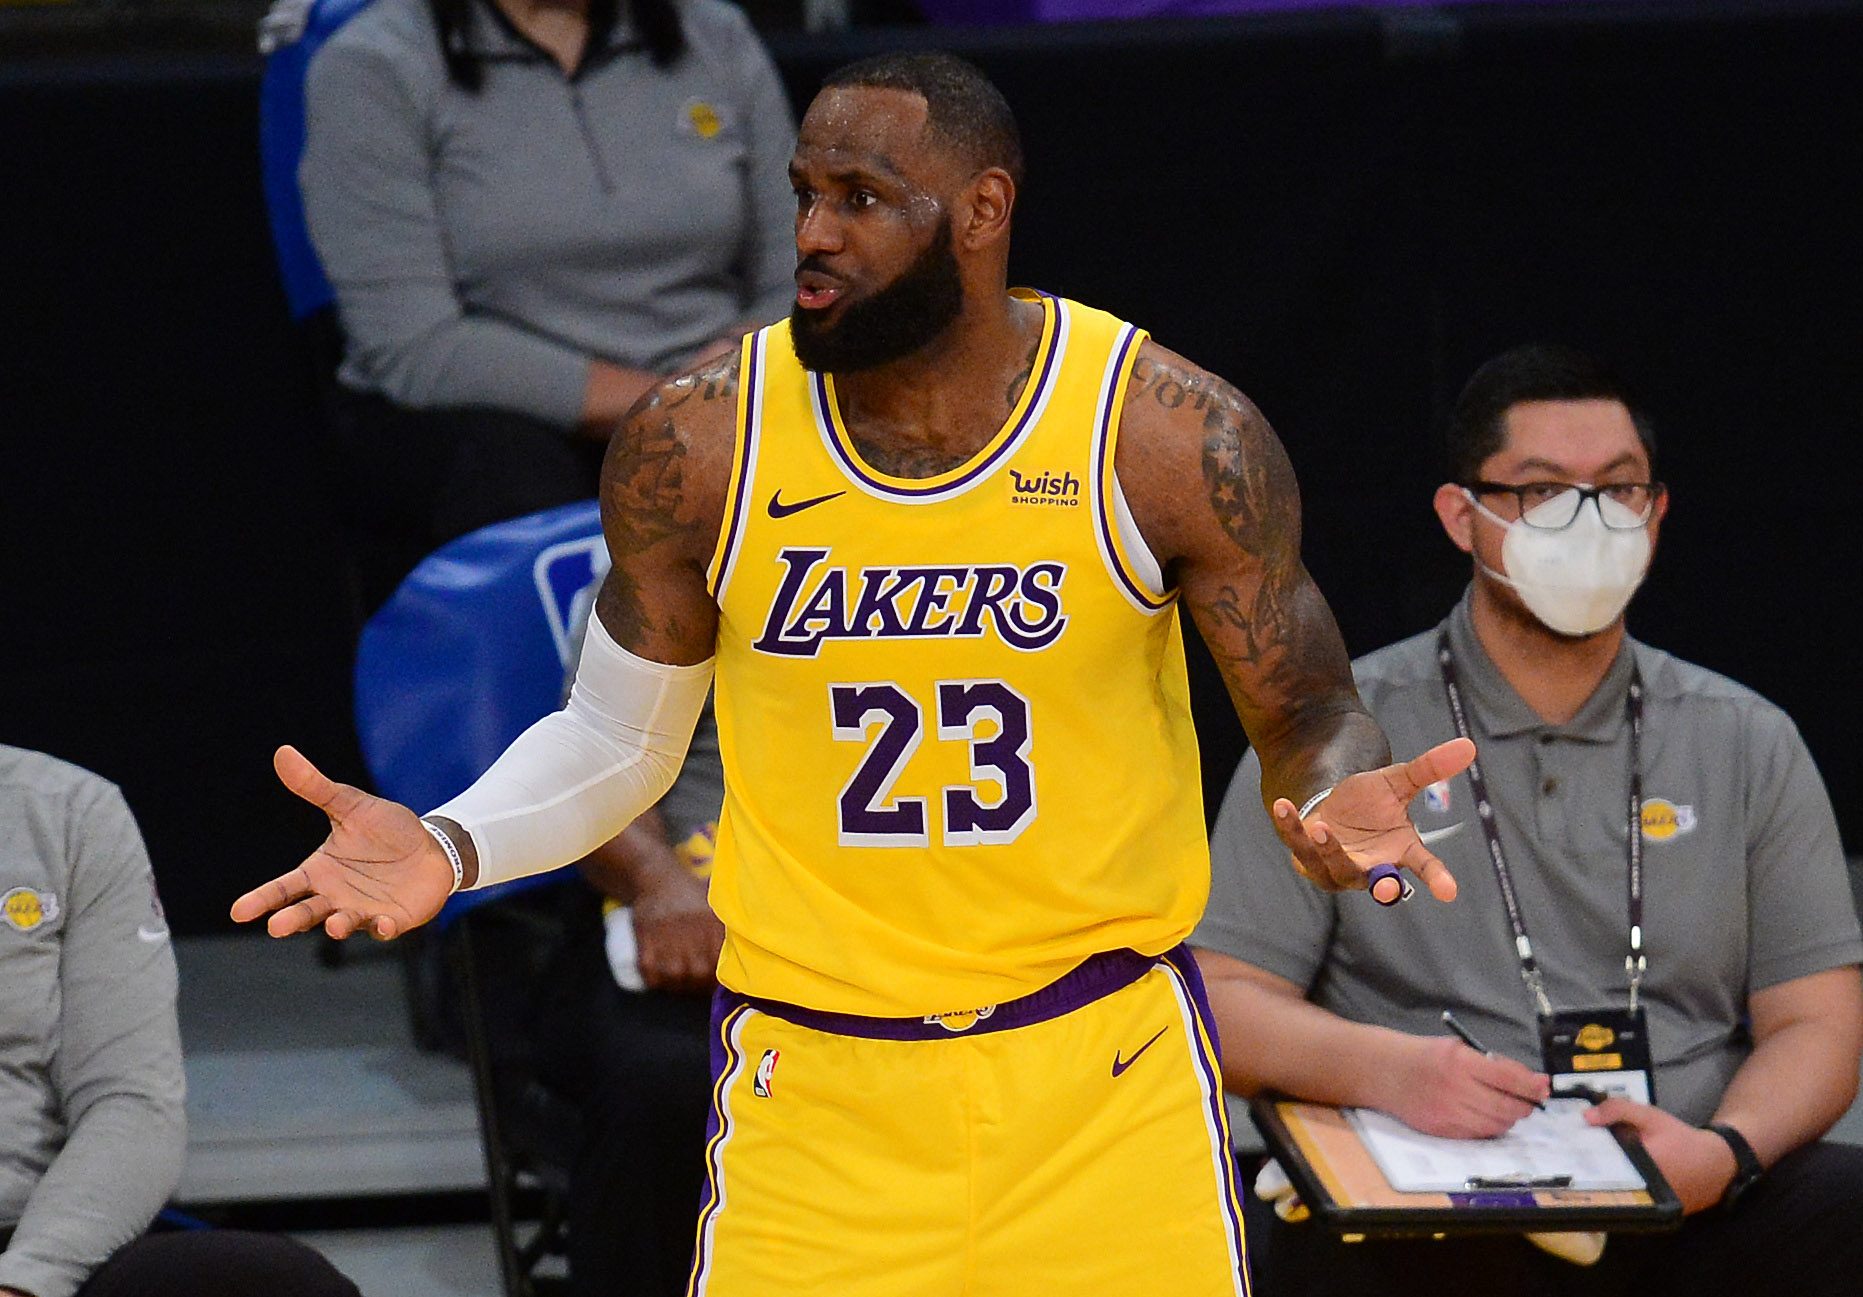 NBA clears ‘misconception’ on LeBron non-suspension